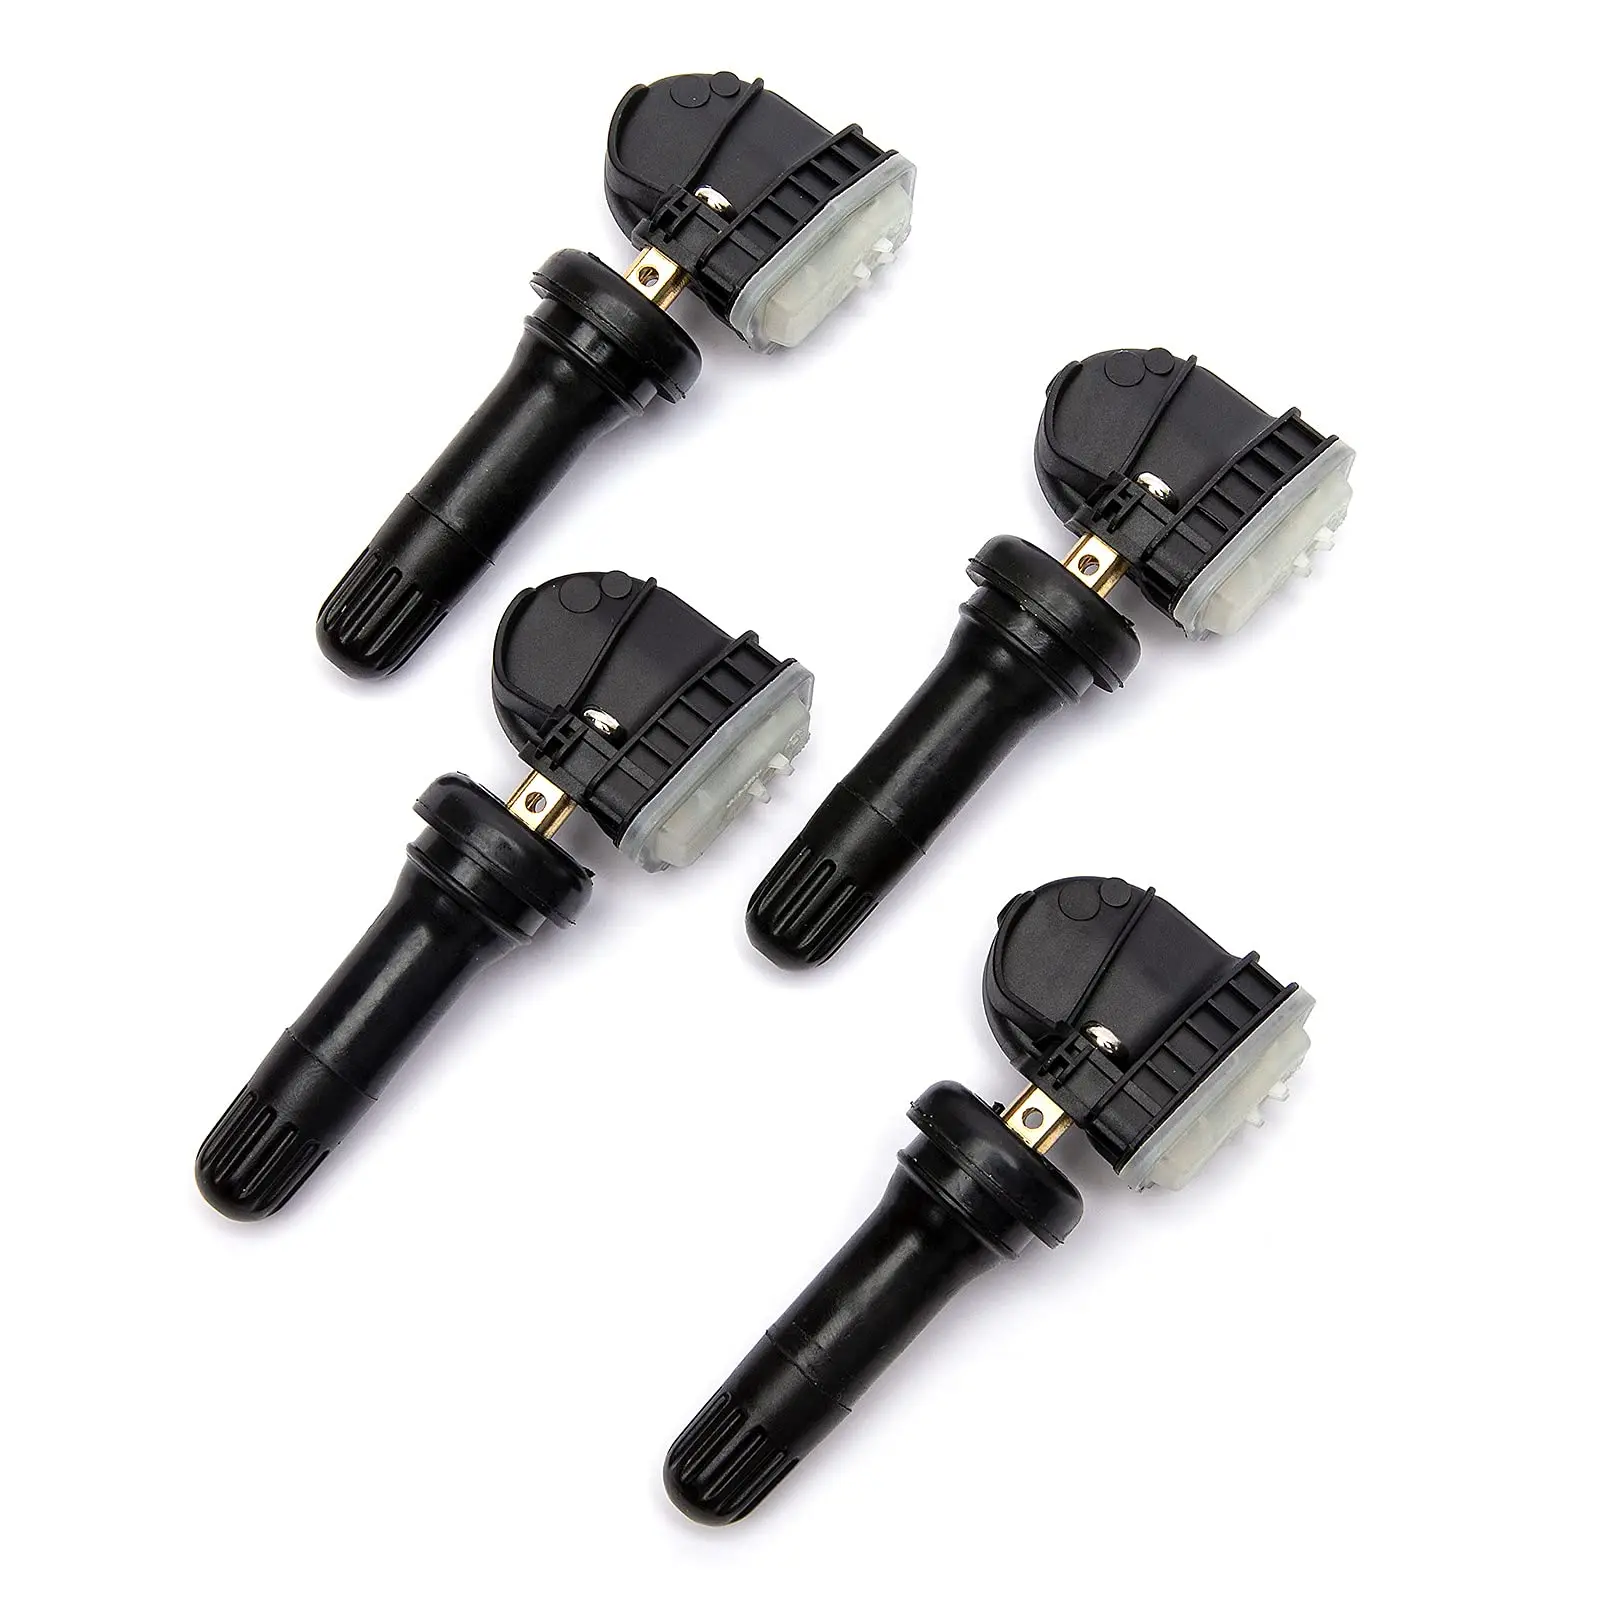 

13598771 13598772 13586335 315MHz Programmed Tire Pressure Monitoring System TPMS Sensor for Chevy GMC Cadillac Buick Set of 4